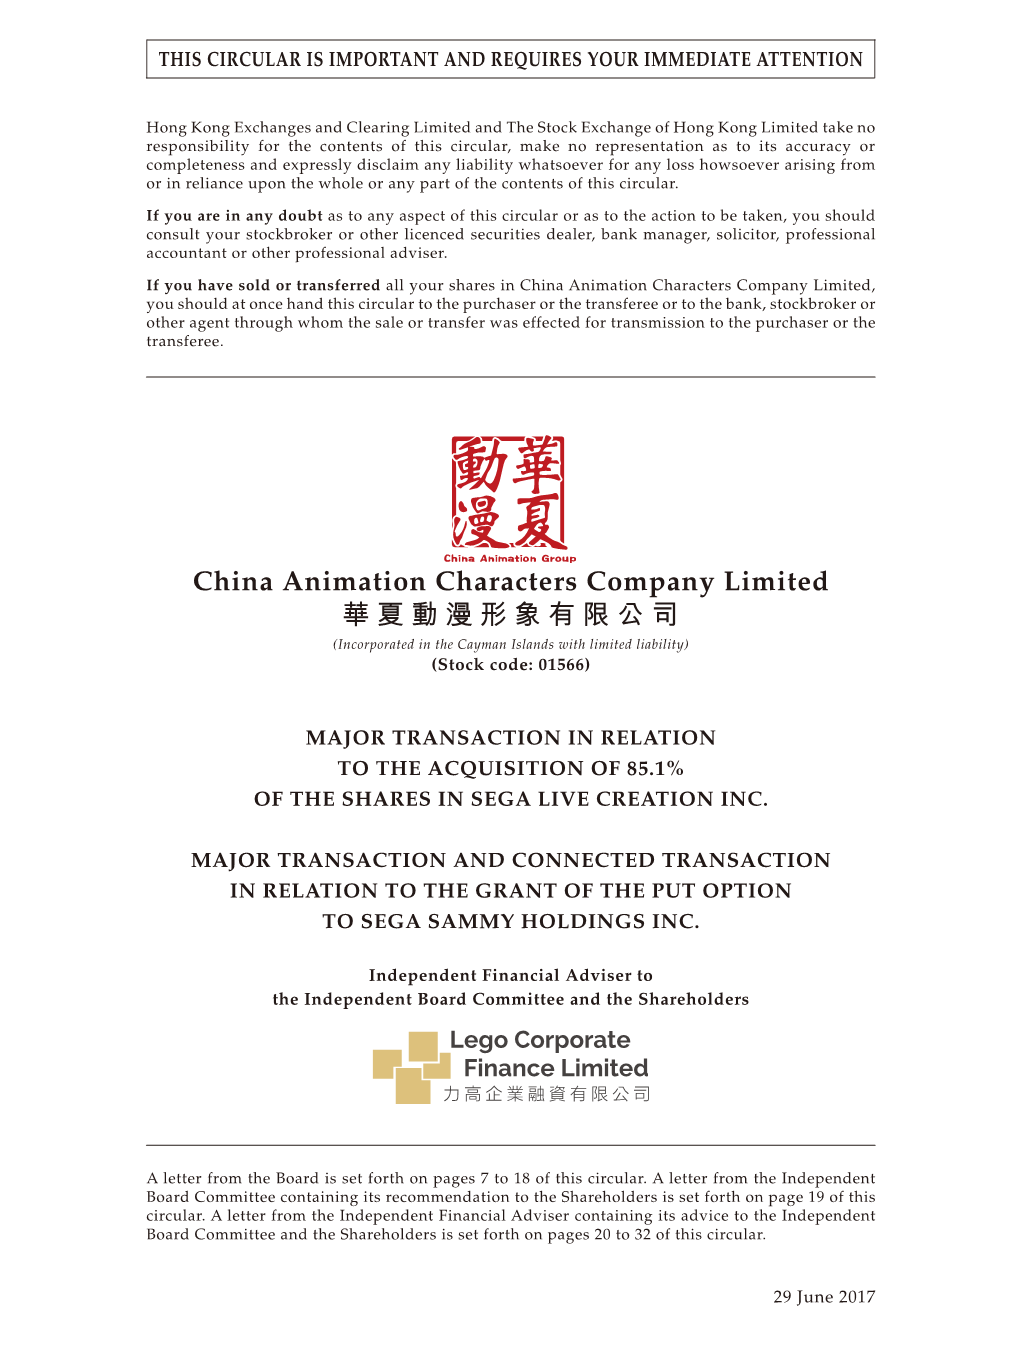 China Animation Characters Company Limited 華夏動漫形象有限公司 (Incorporated in the Cayman Islands with Limited Liability) (Stock Code: 01566)